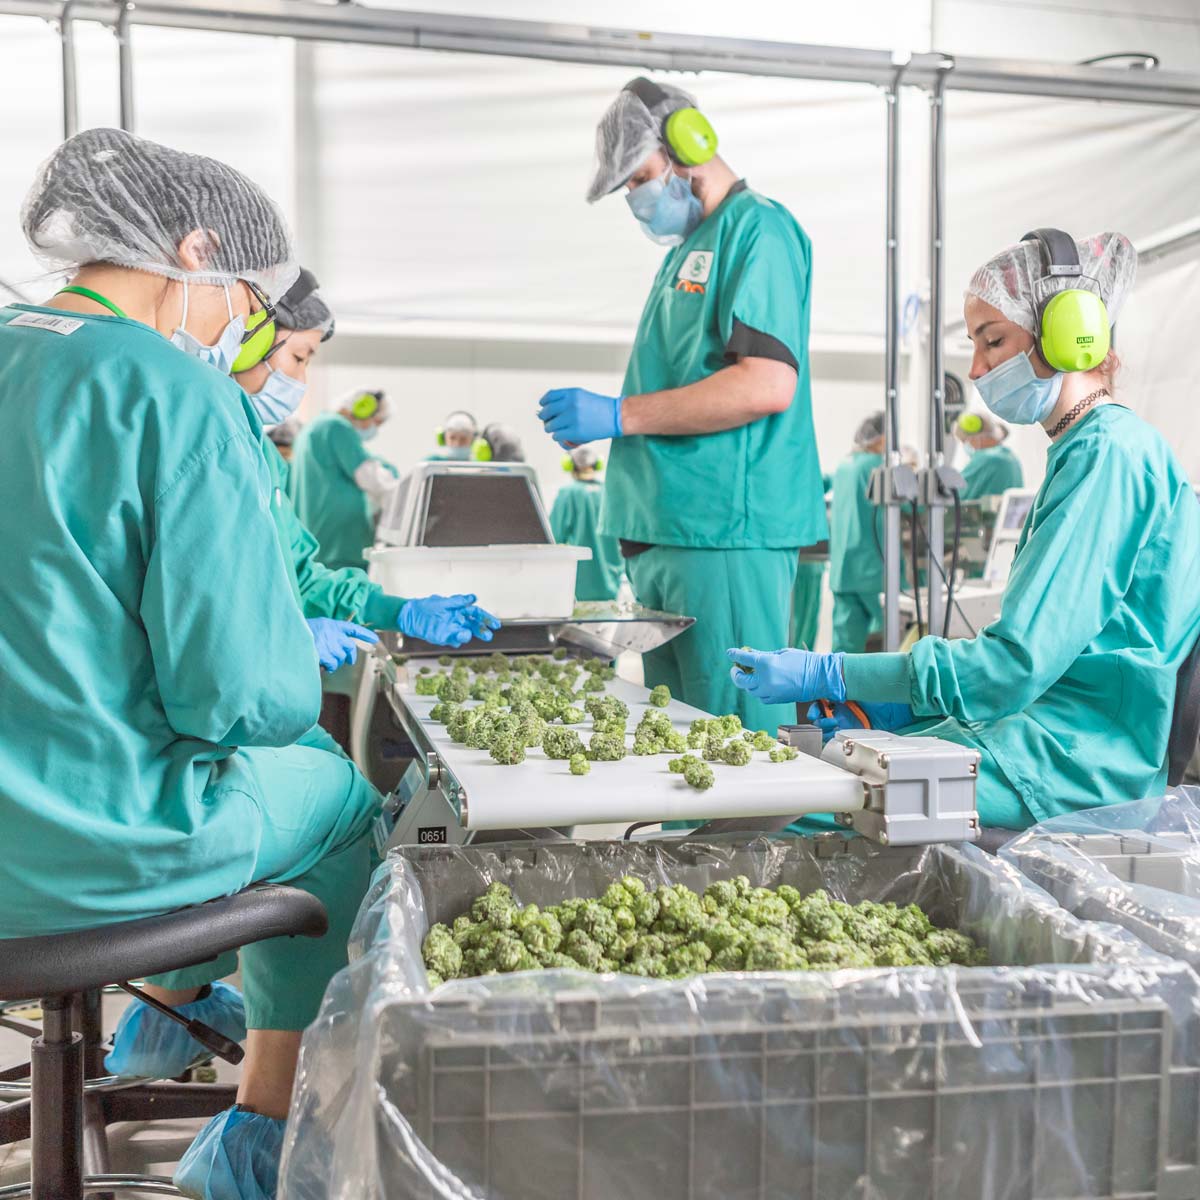 Cannabis trim room with workers wearing hair nets, gloves, and scrubs.